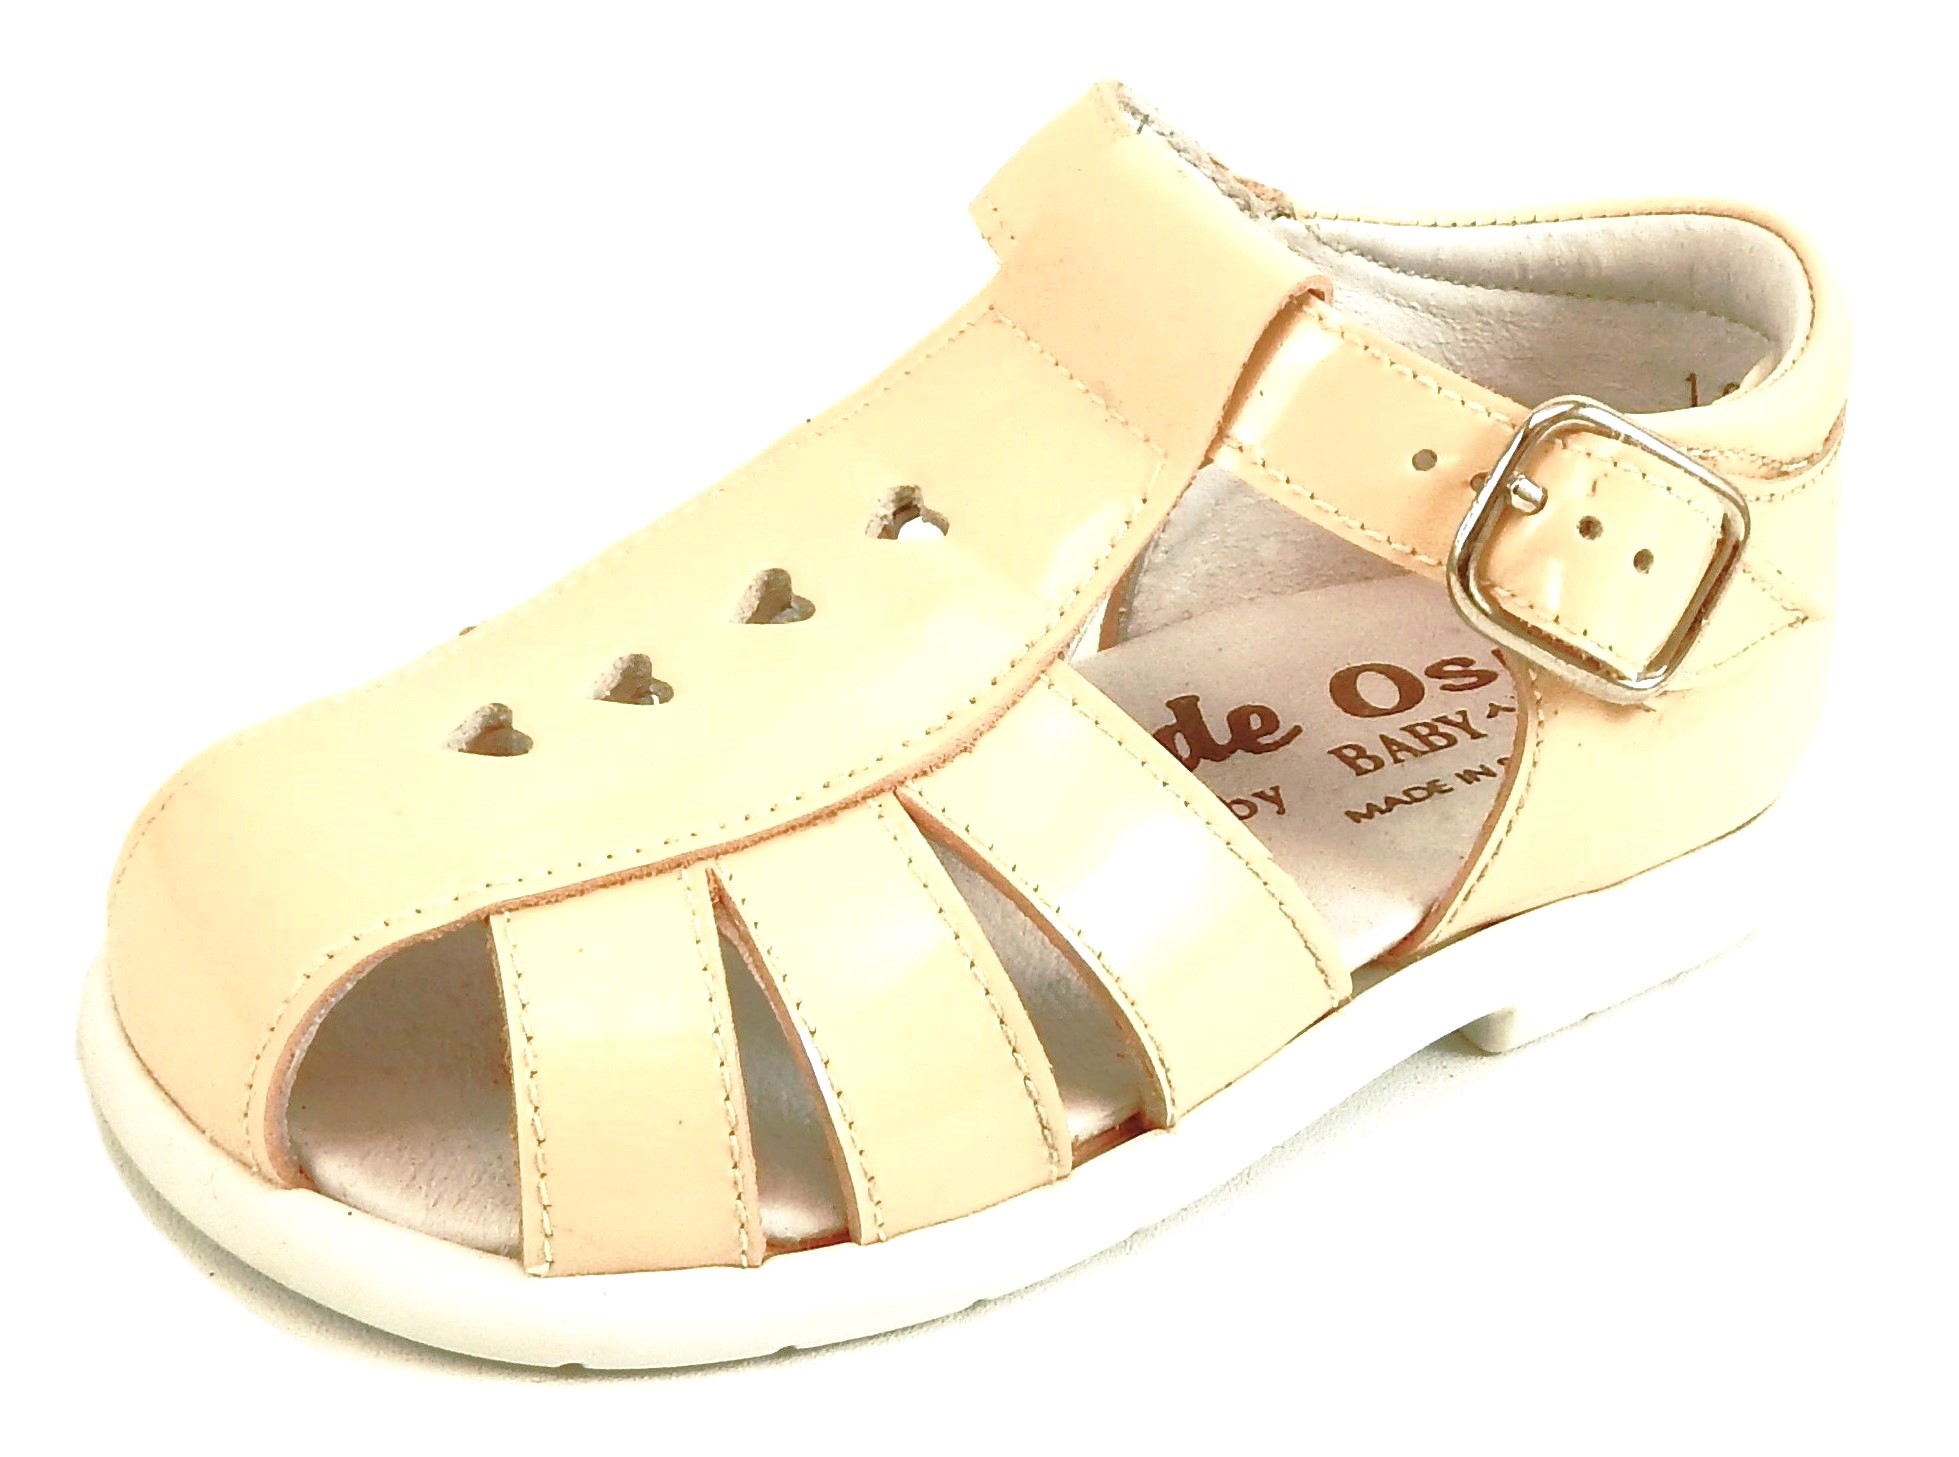 B-109 - Peach Patent Baby Sandals - Euro 20 Size 4.5